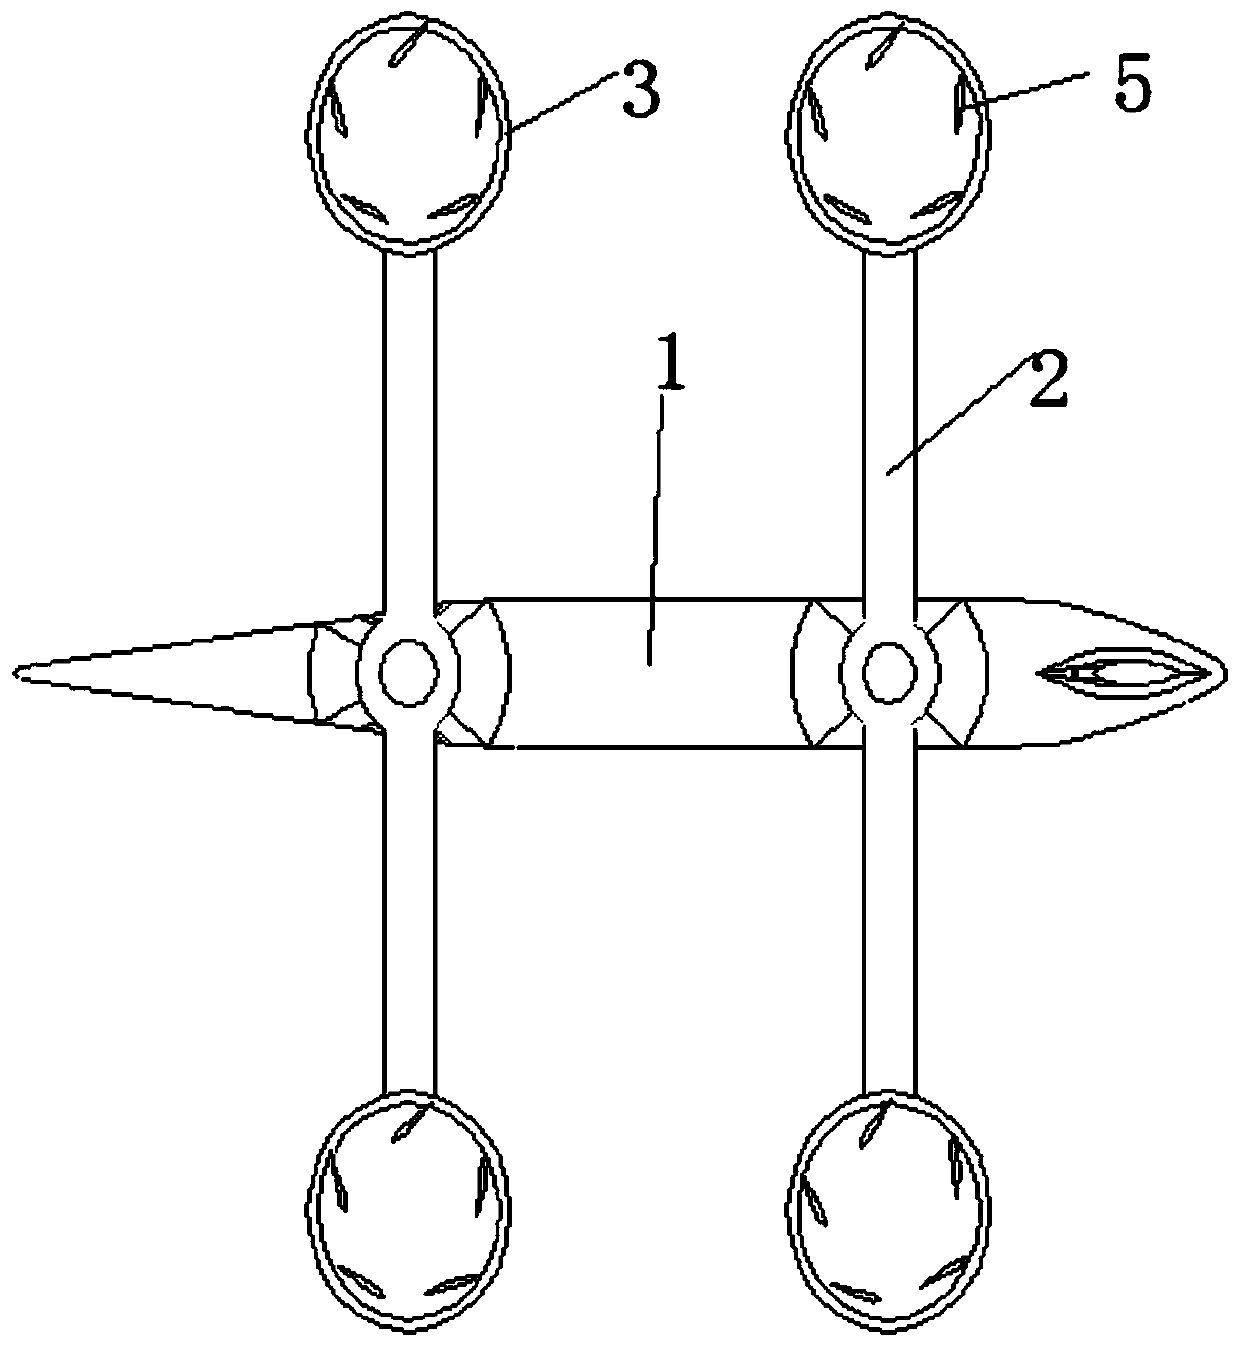 Cross-medium aircraft based on common rotor and cycloidal propeller